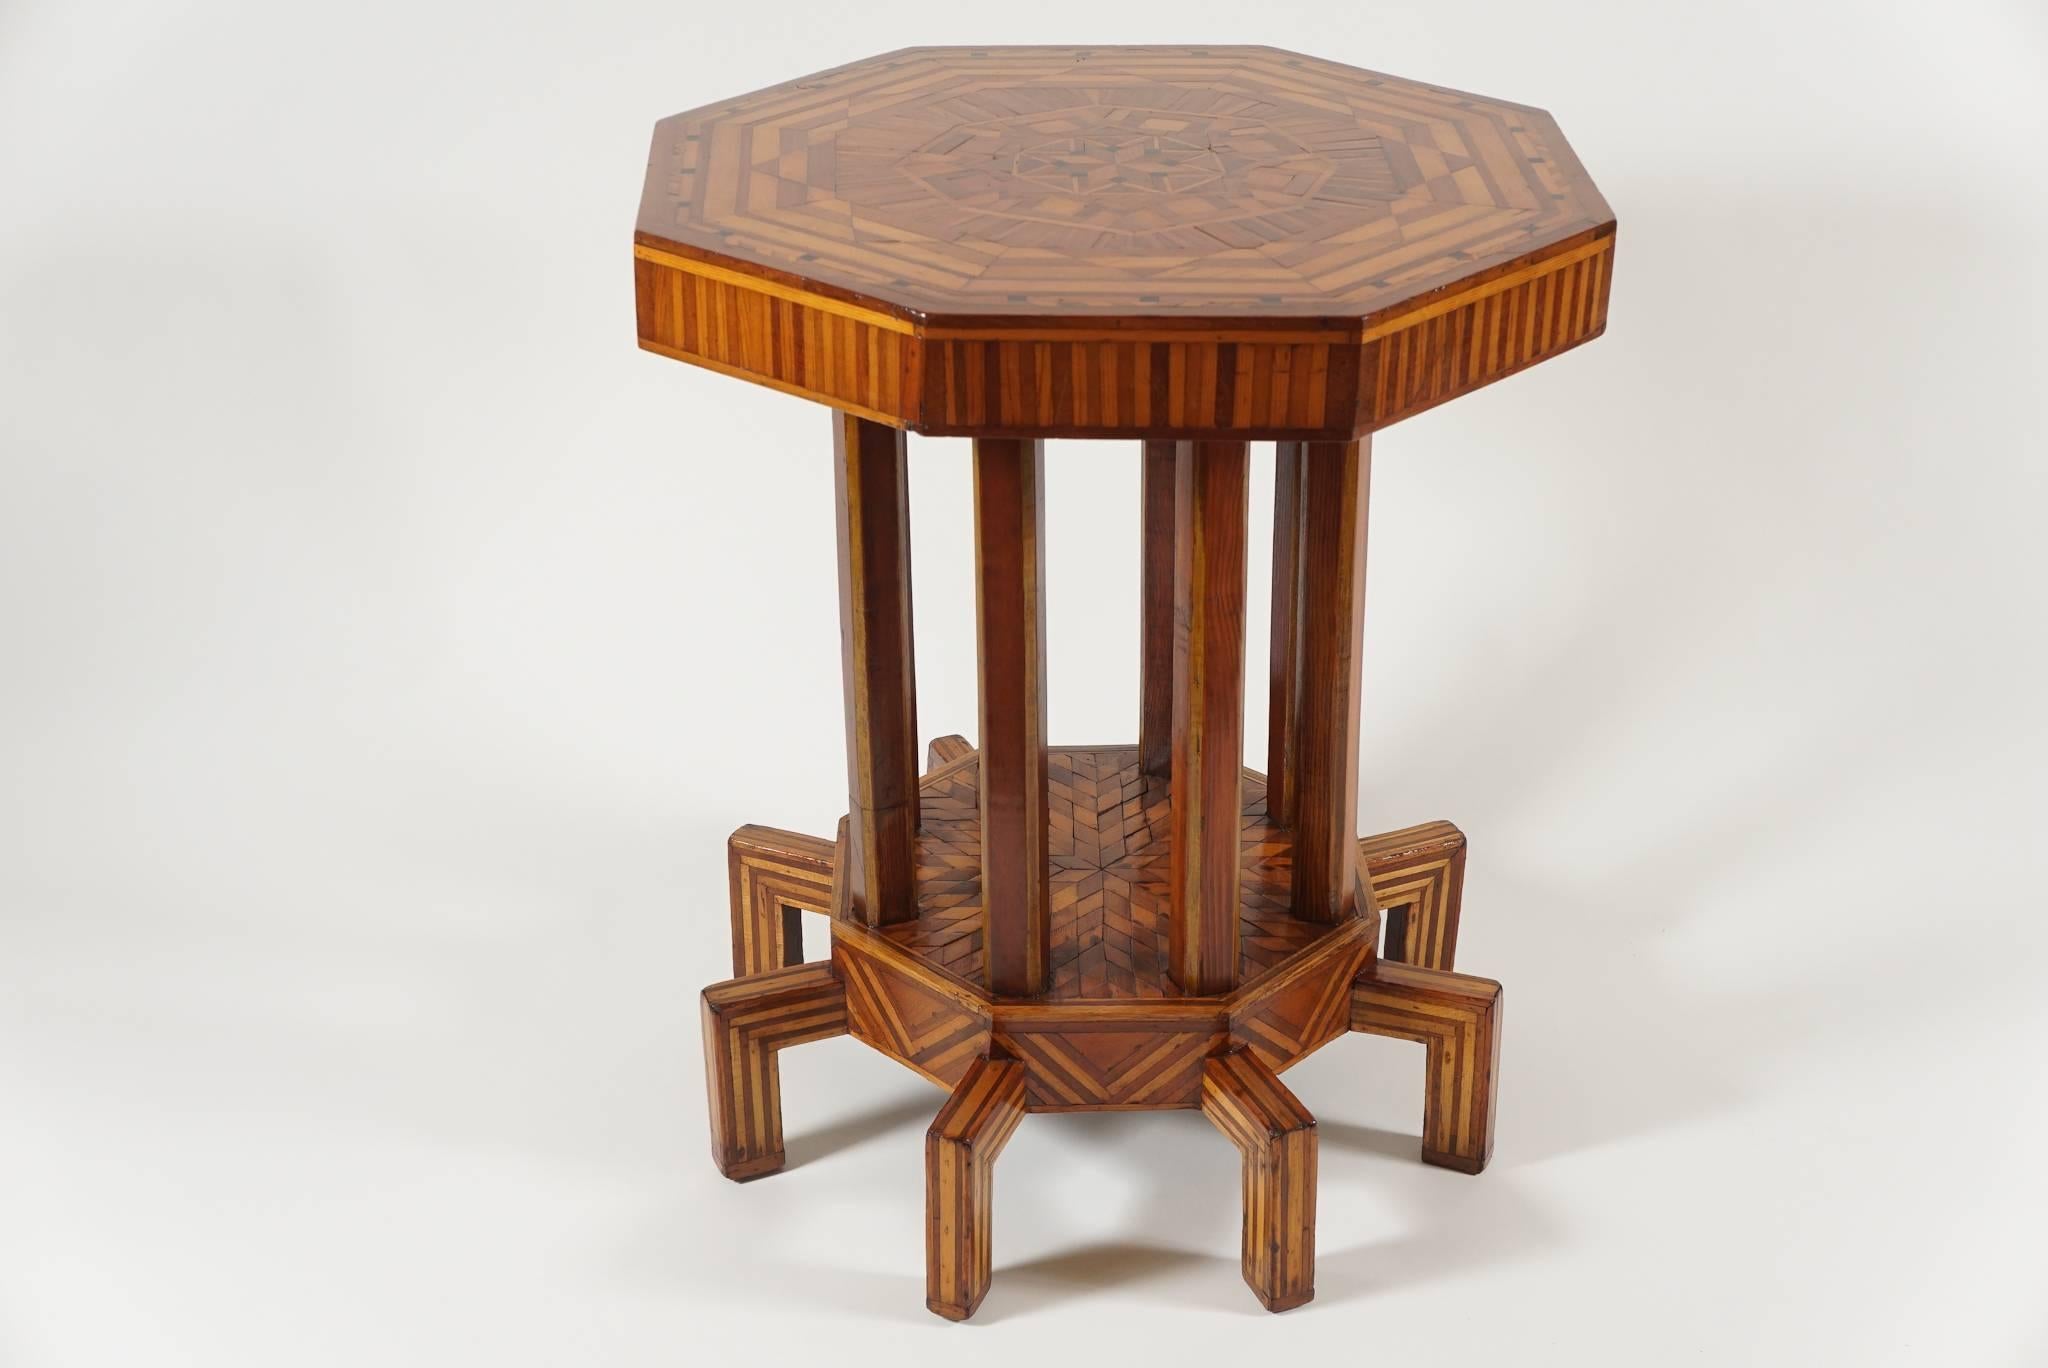 A truly remarkable and remarkably rare Vienna Secessionist period and style specimen wood parquetry table of octagonal form having all-over intricately geometric inlaid woods, including ebony.